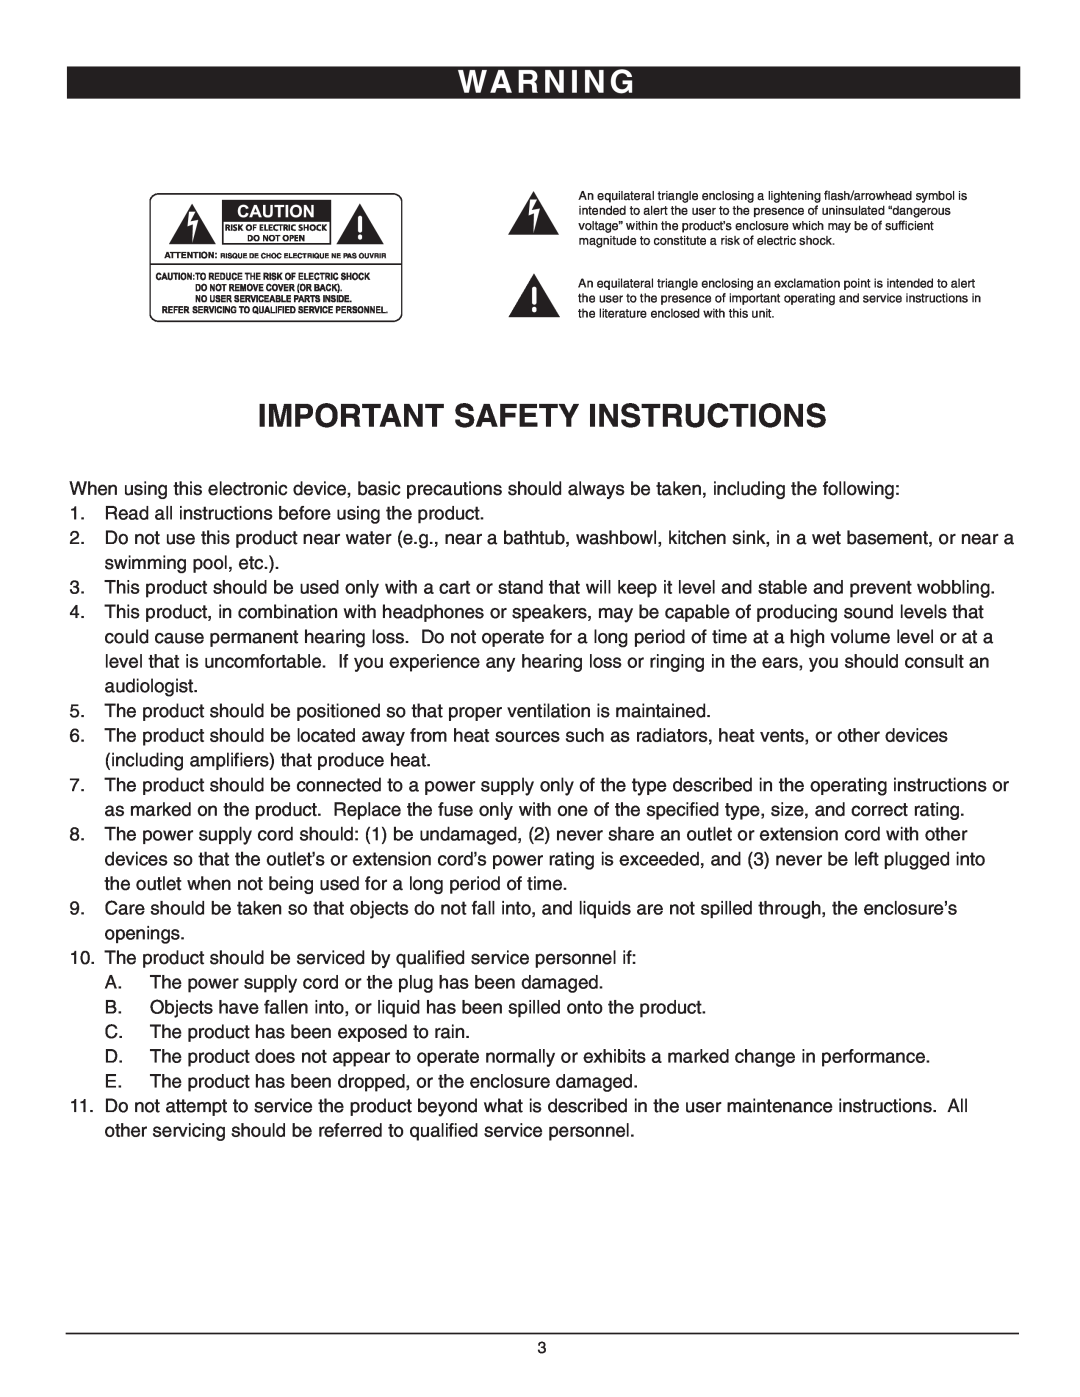 Nady Systems GTH-100 owner manual Wa R N I N G, Important Safety Instructions 